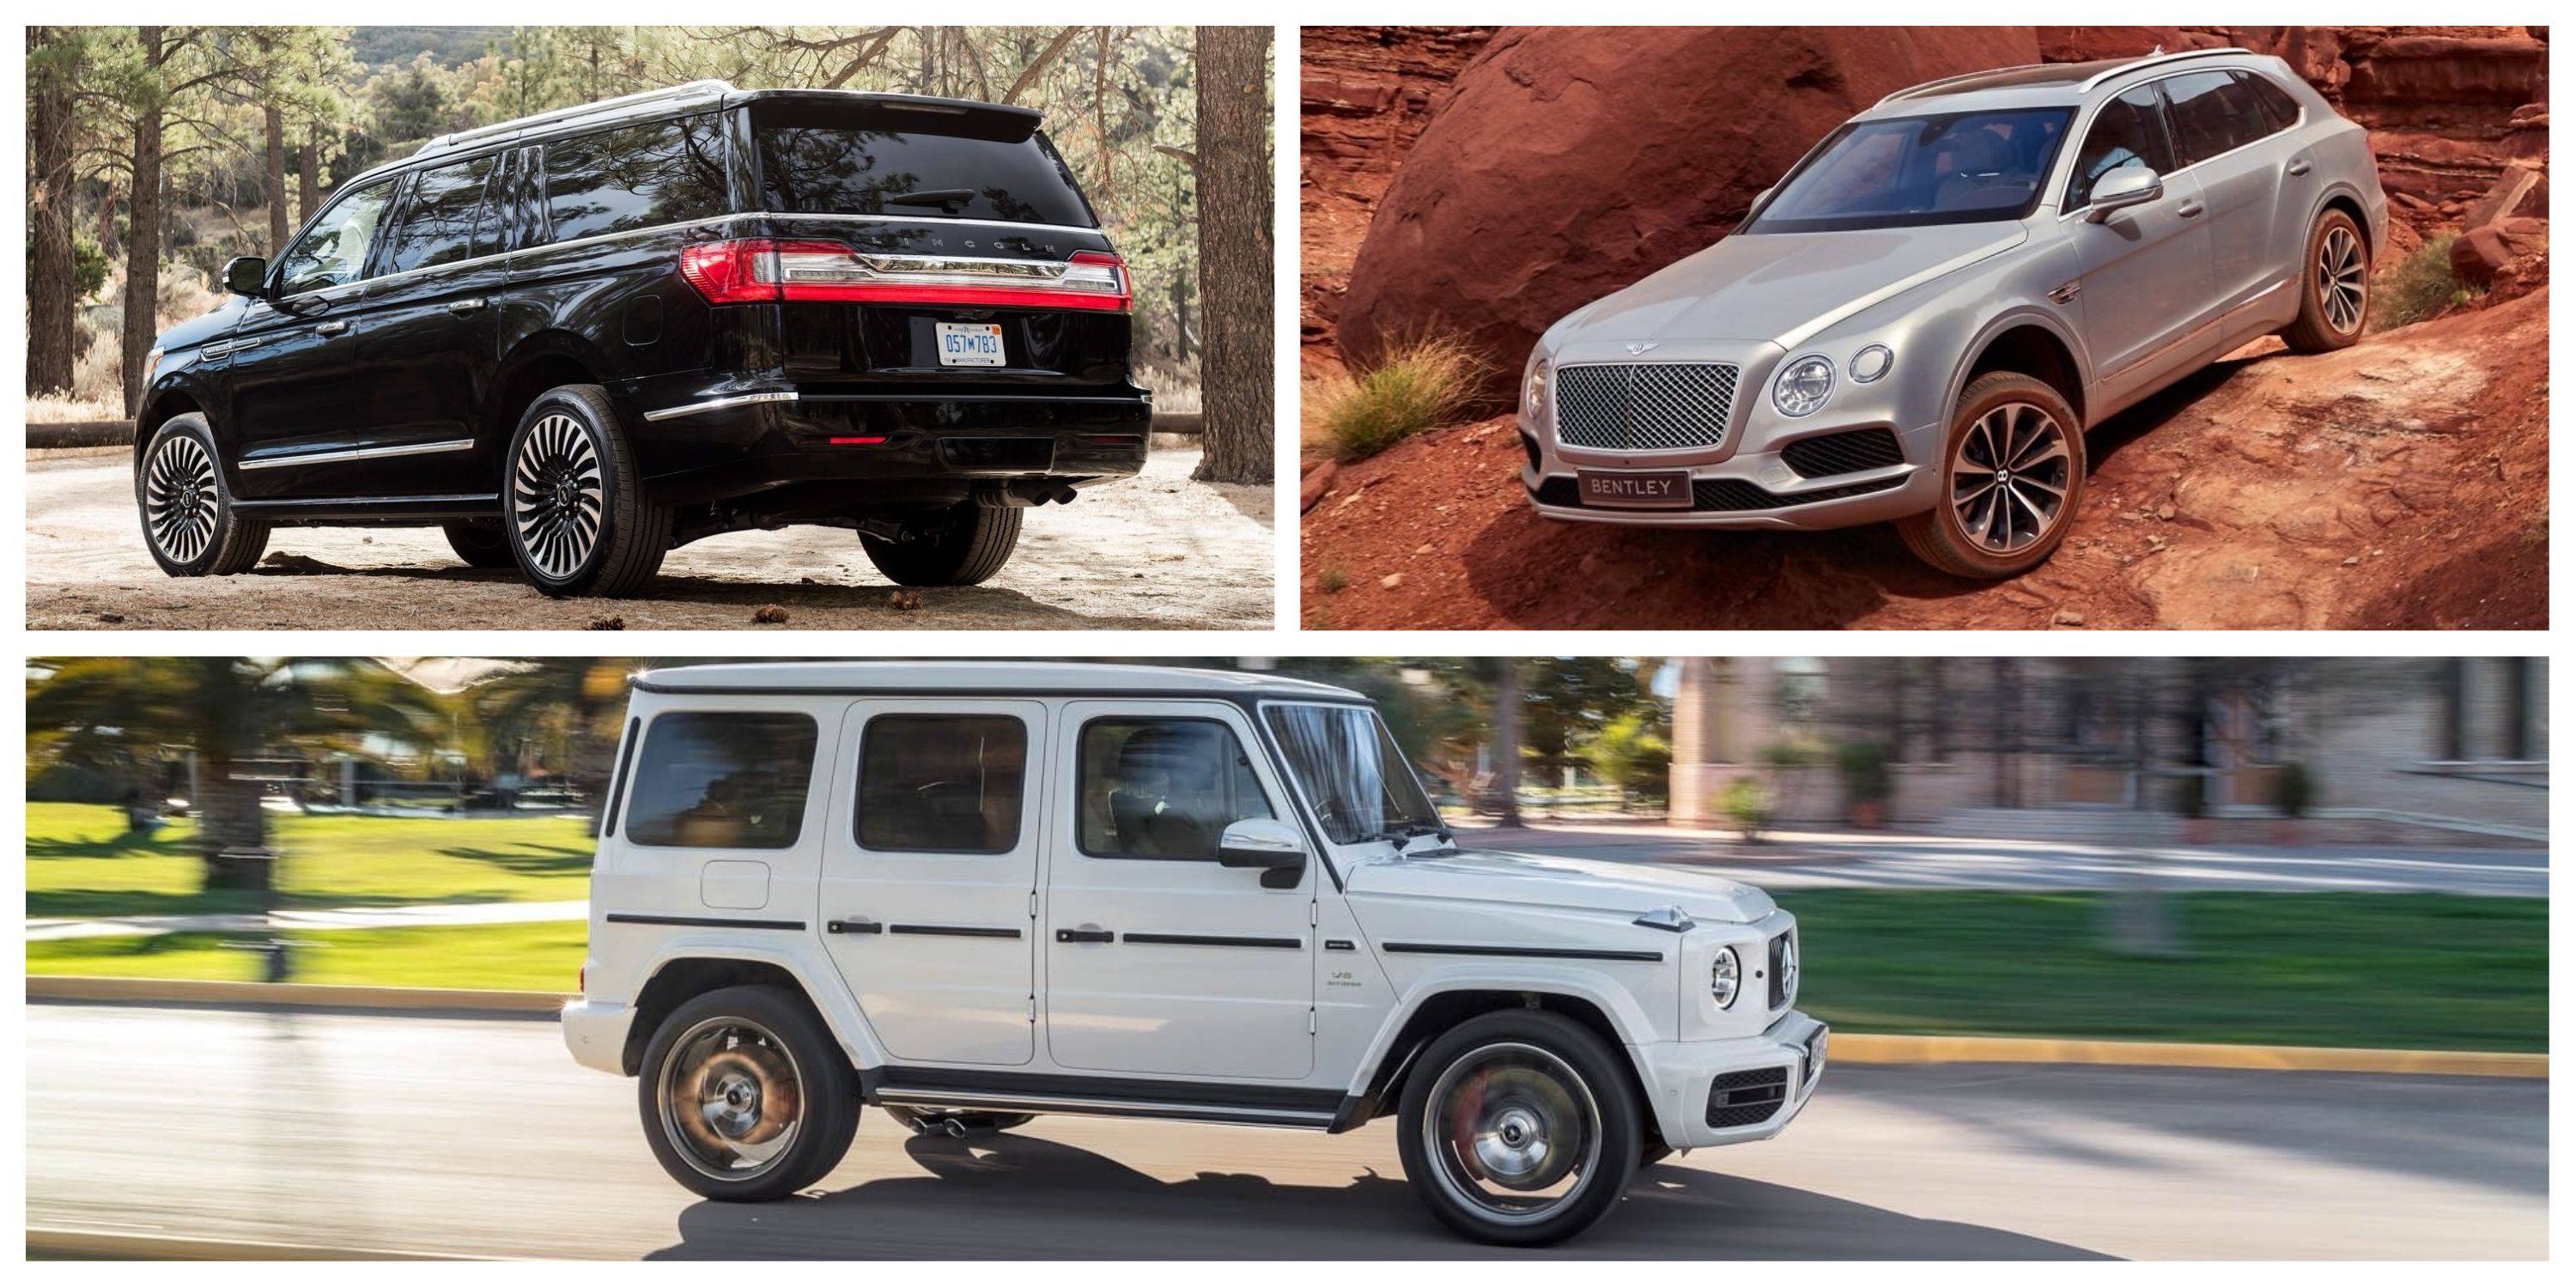 Top Rated Luxury Suvs With 3rd Row Seating | Brokeasshome.com